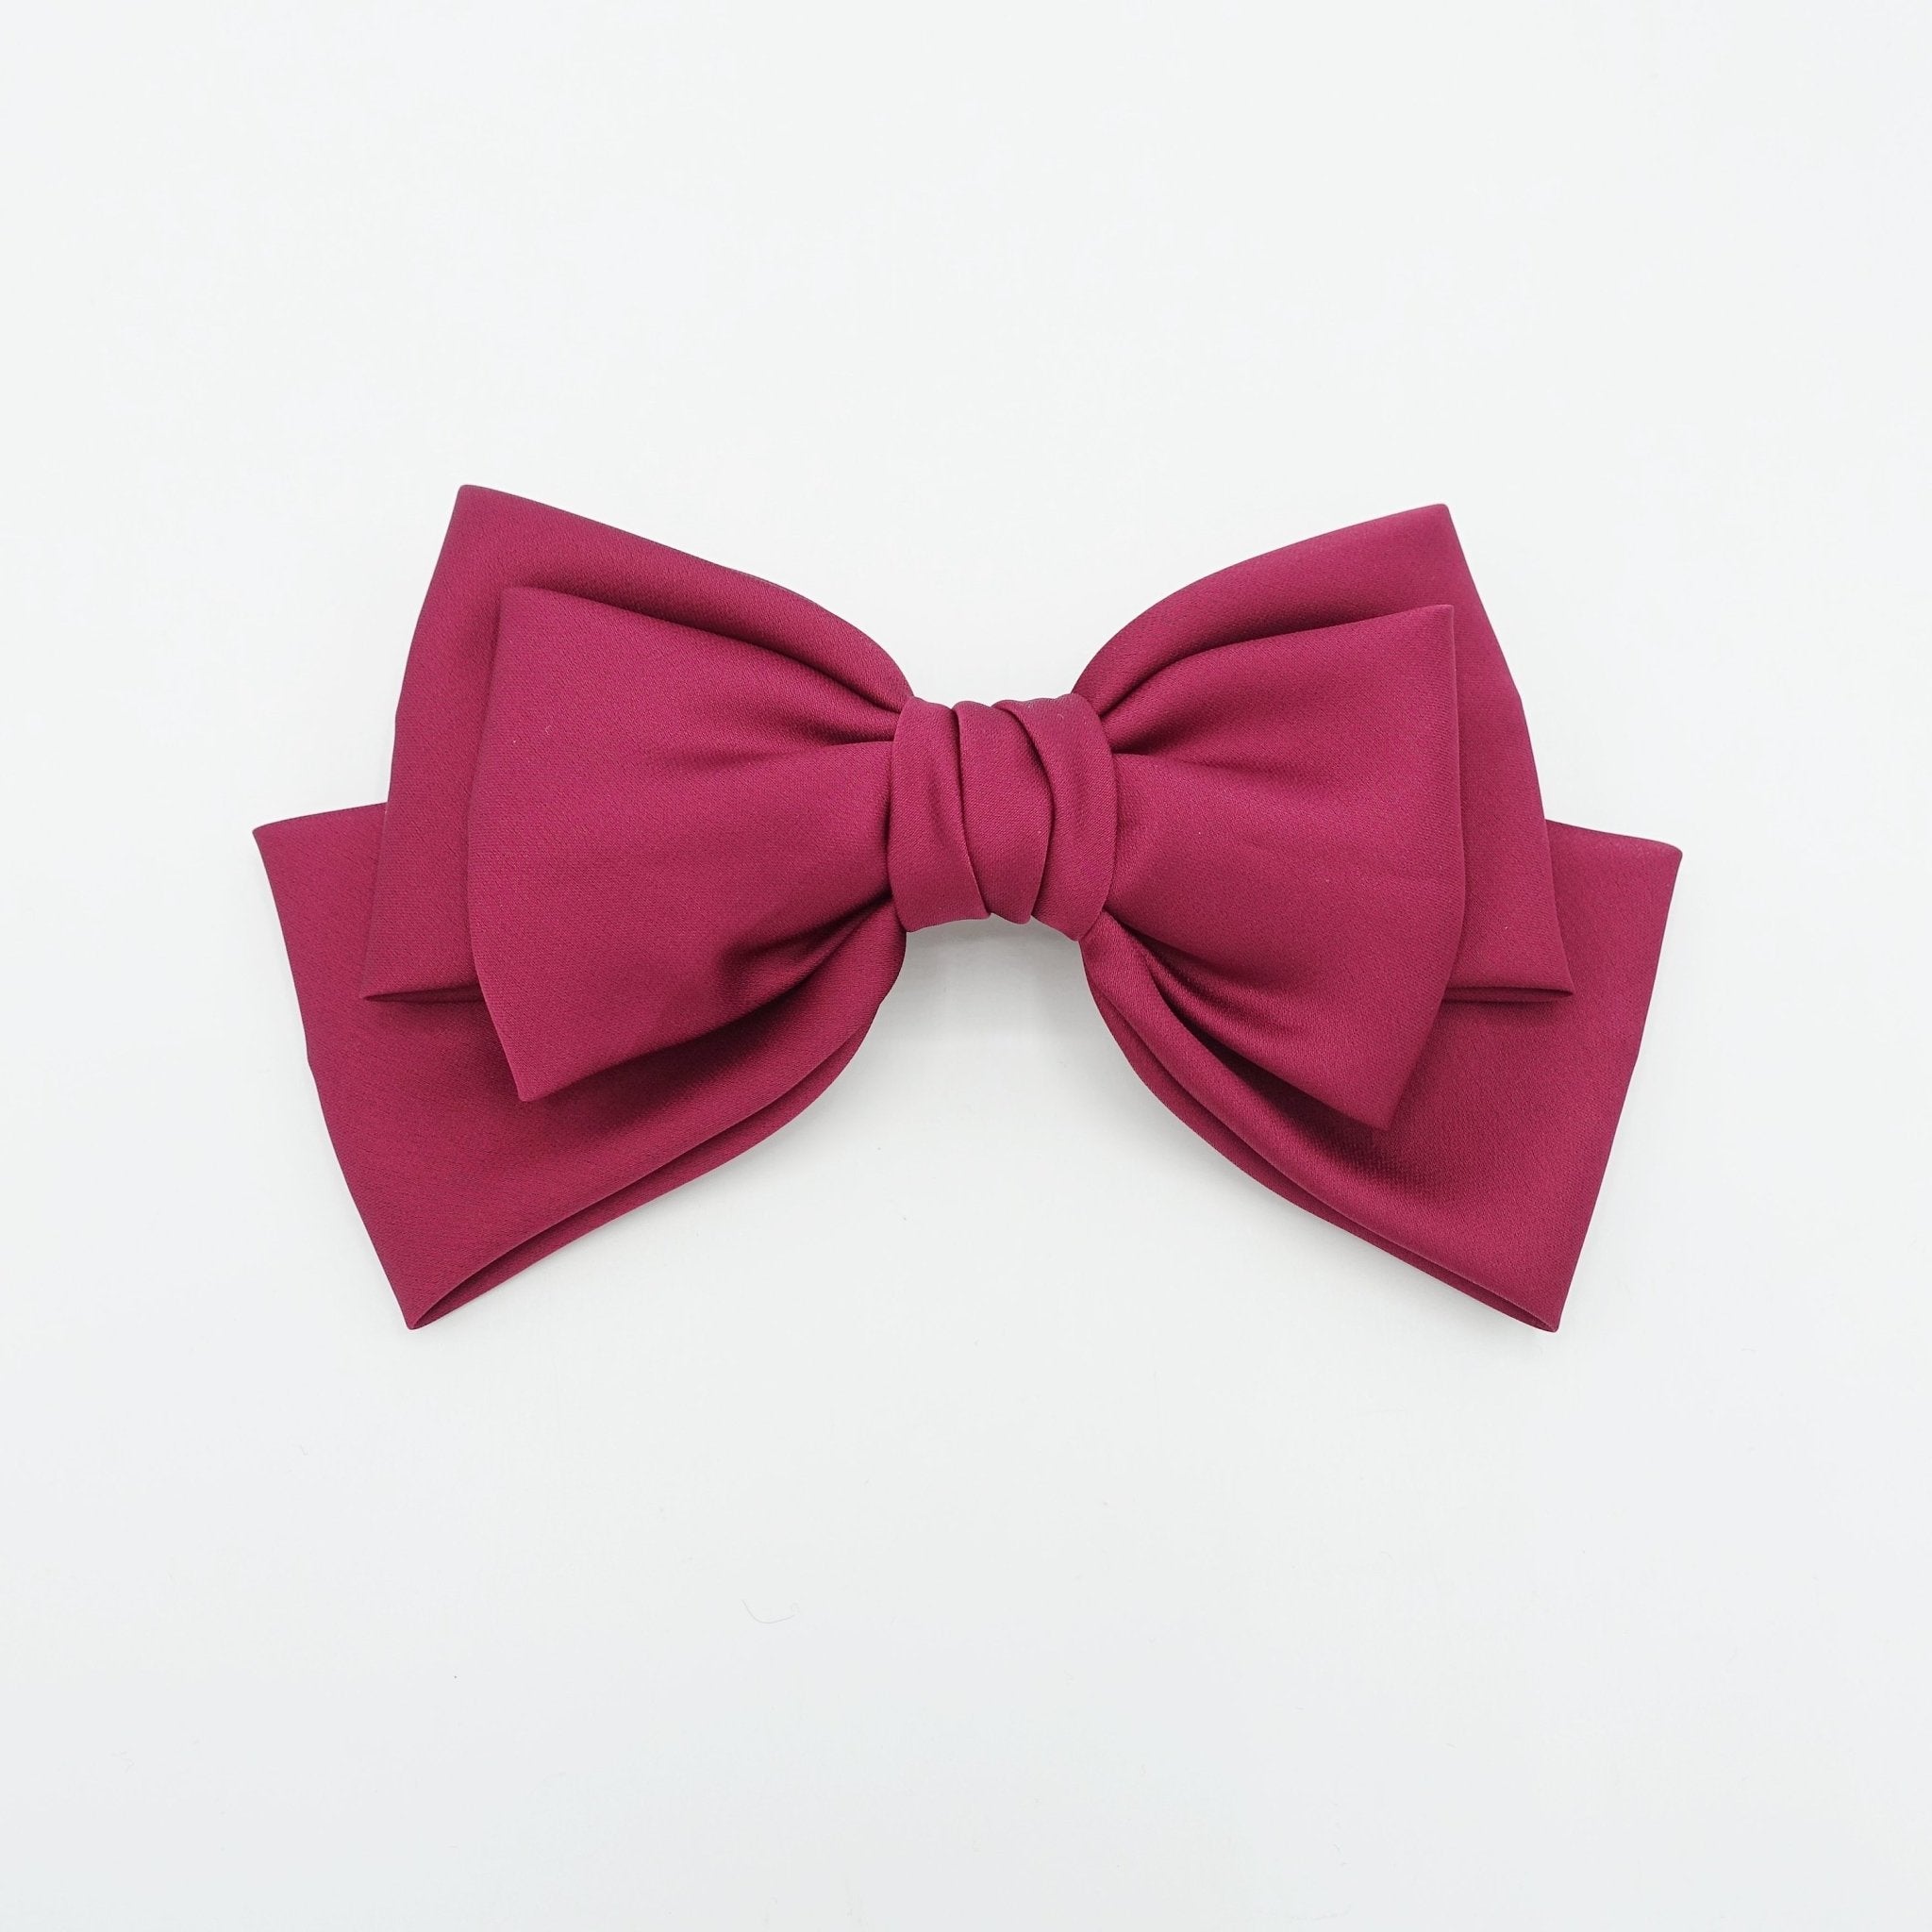 veryshine.com Barrettes & Clips Red wine triple satin hair bow moderate style hair accessory for women